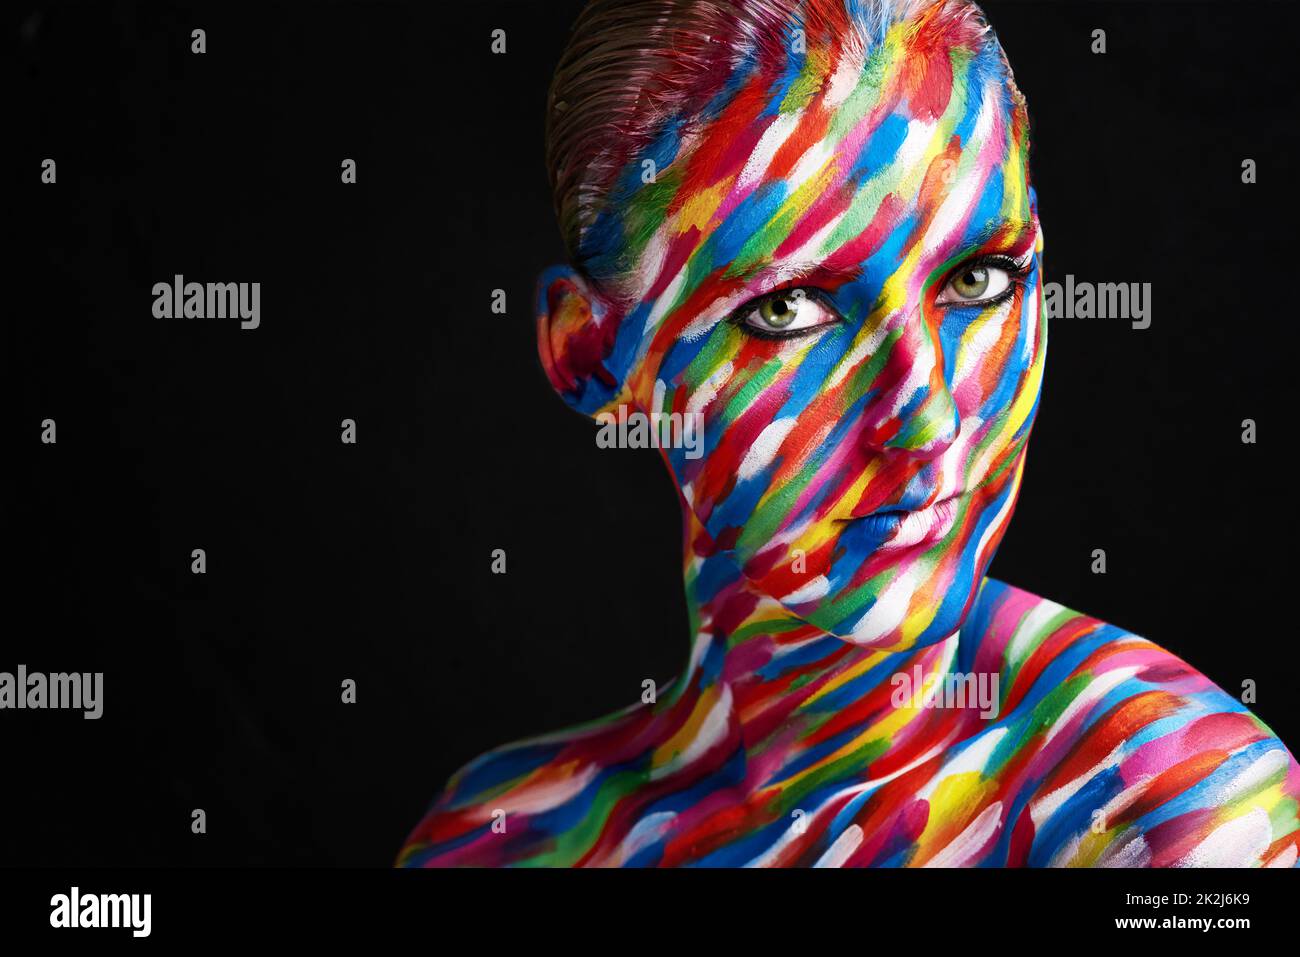 Makeup is an art. Studio shot of a young woman posing with brightly colored paint on her face against a black background. Stock Photo